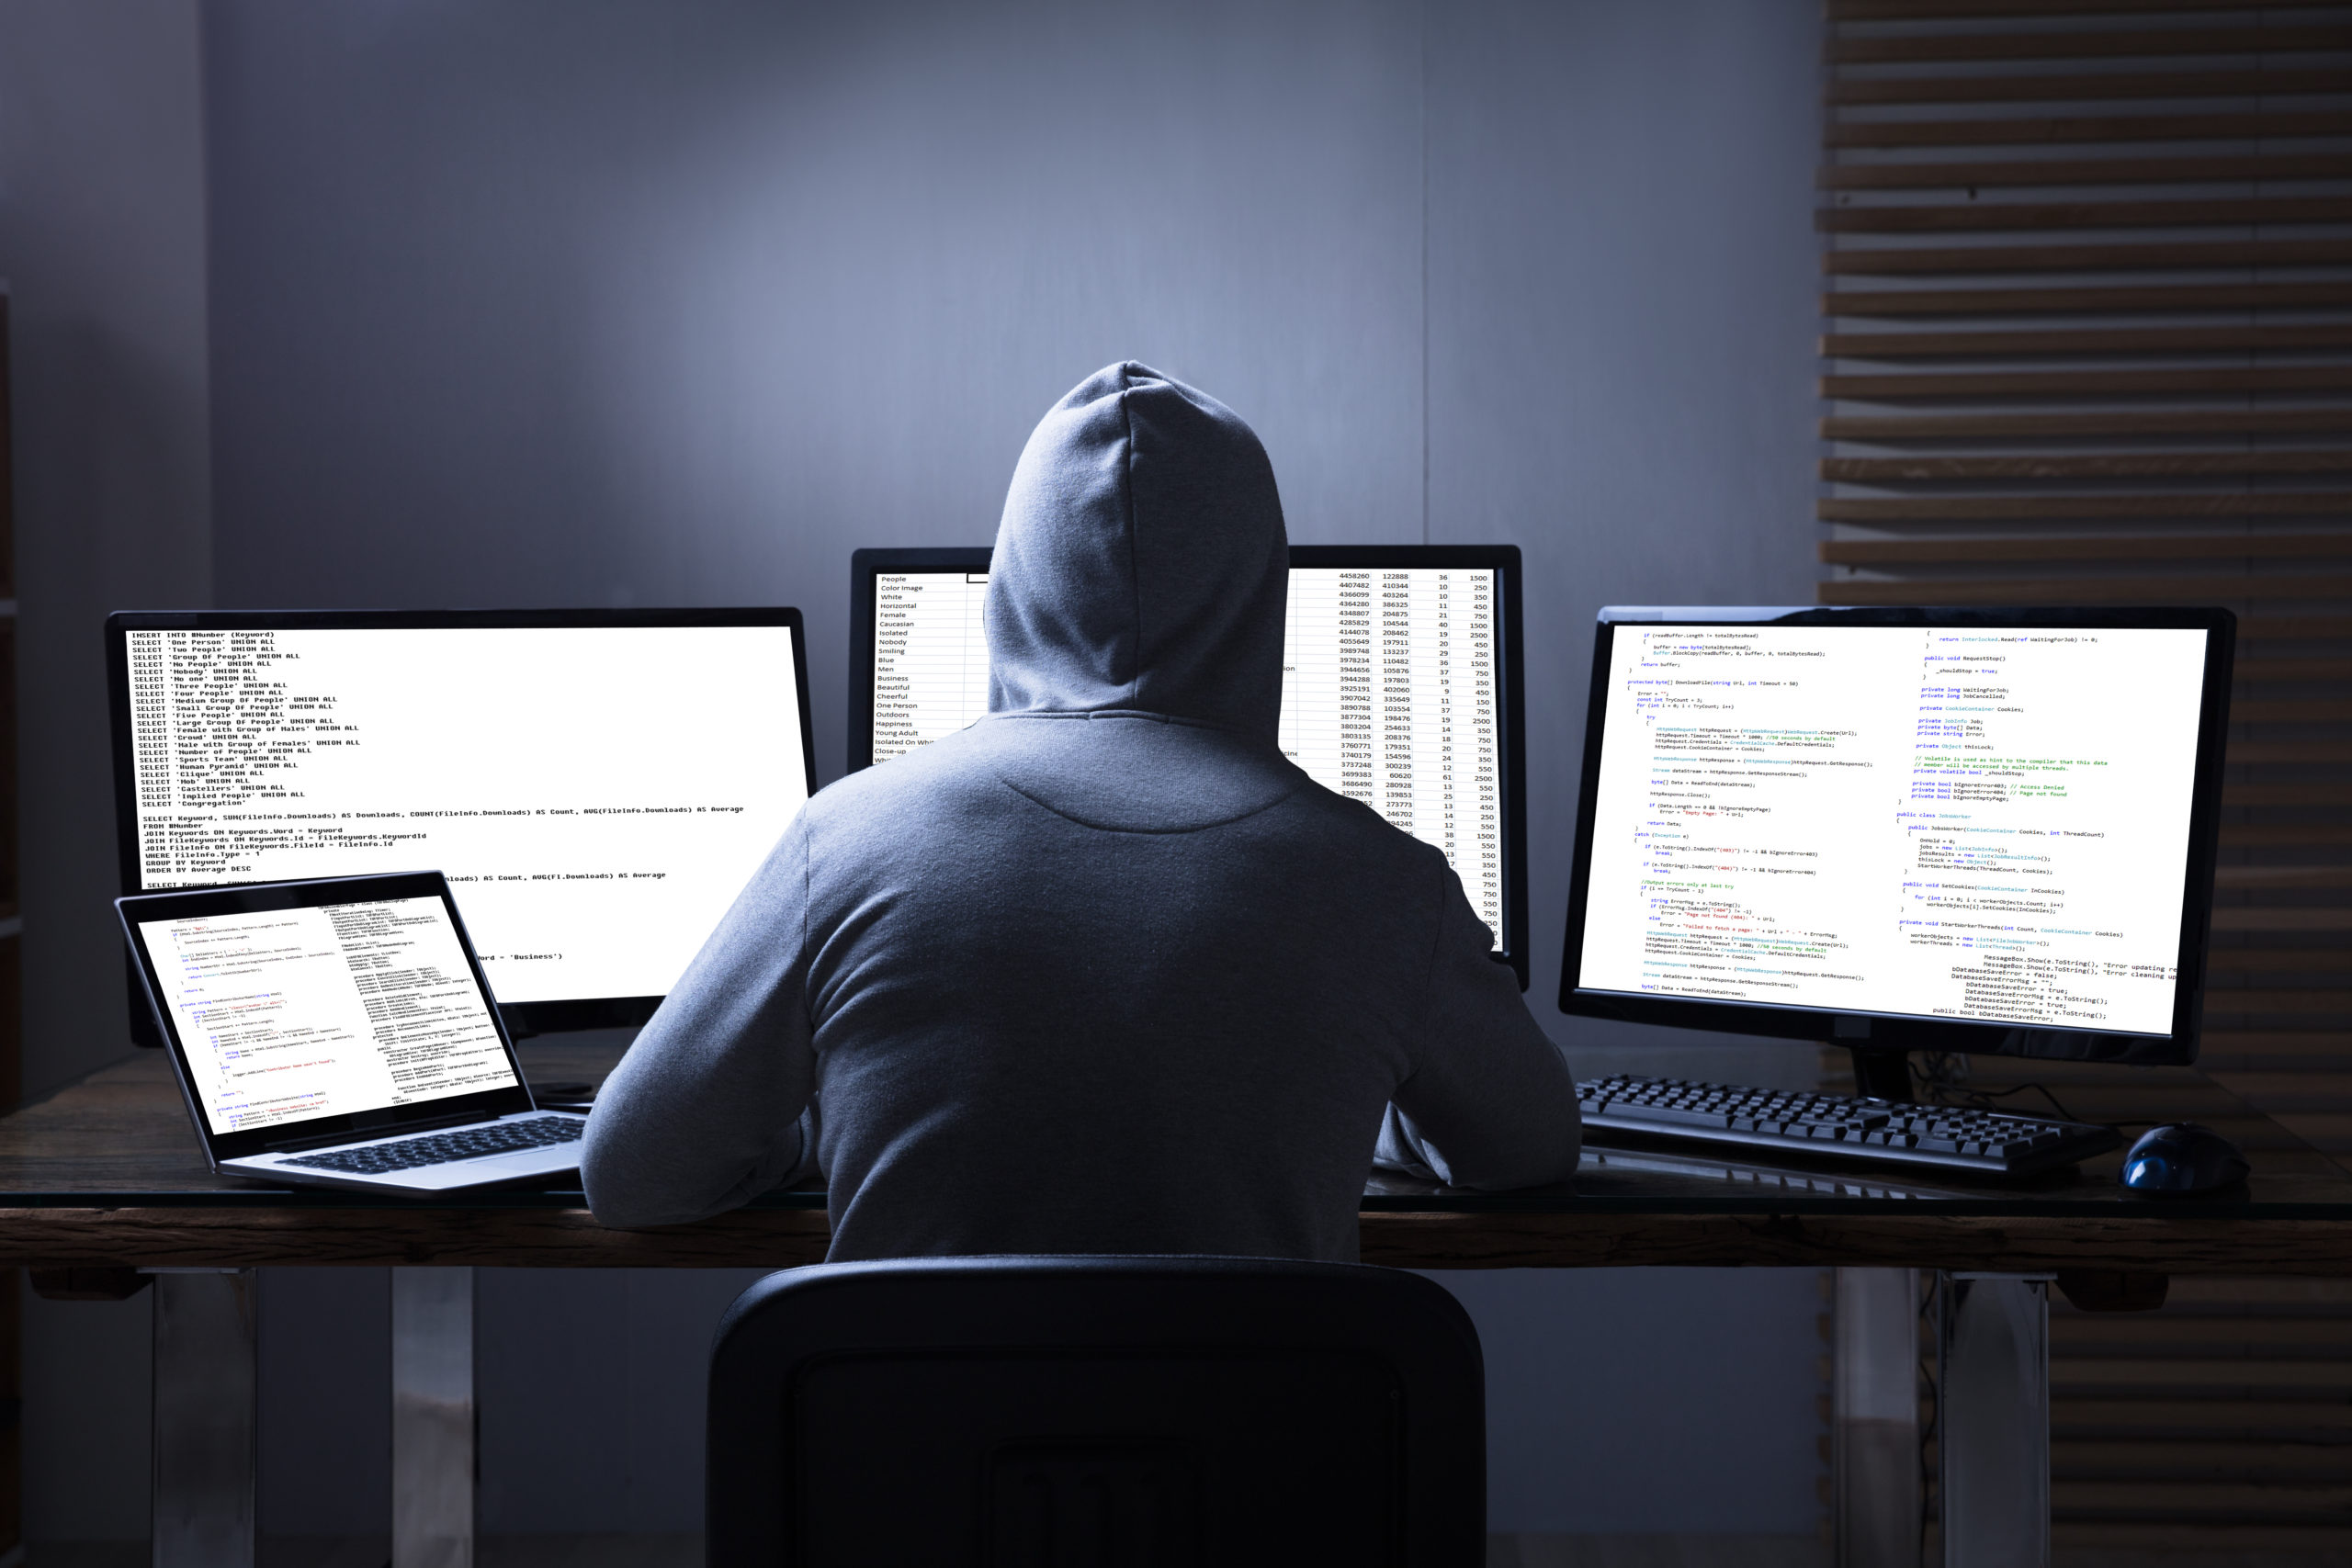 Cyber criminal wearing hoodie sits at desk, back to camera, in front of laptop computer and three large display monitors.